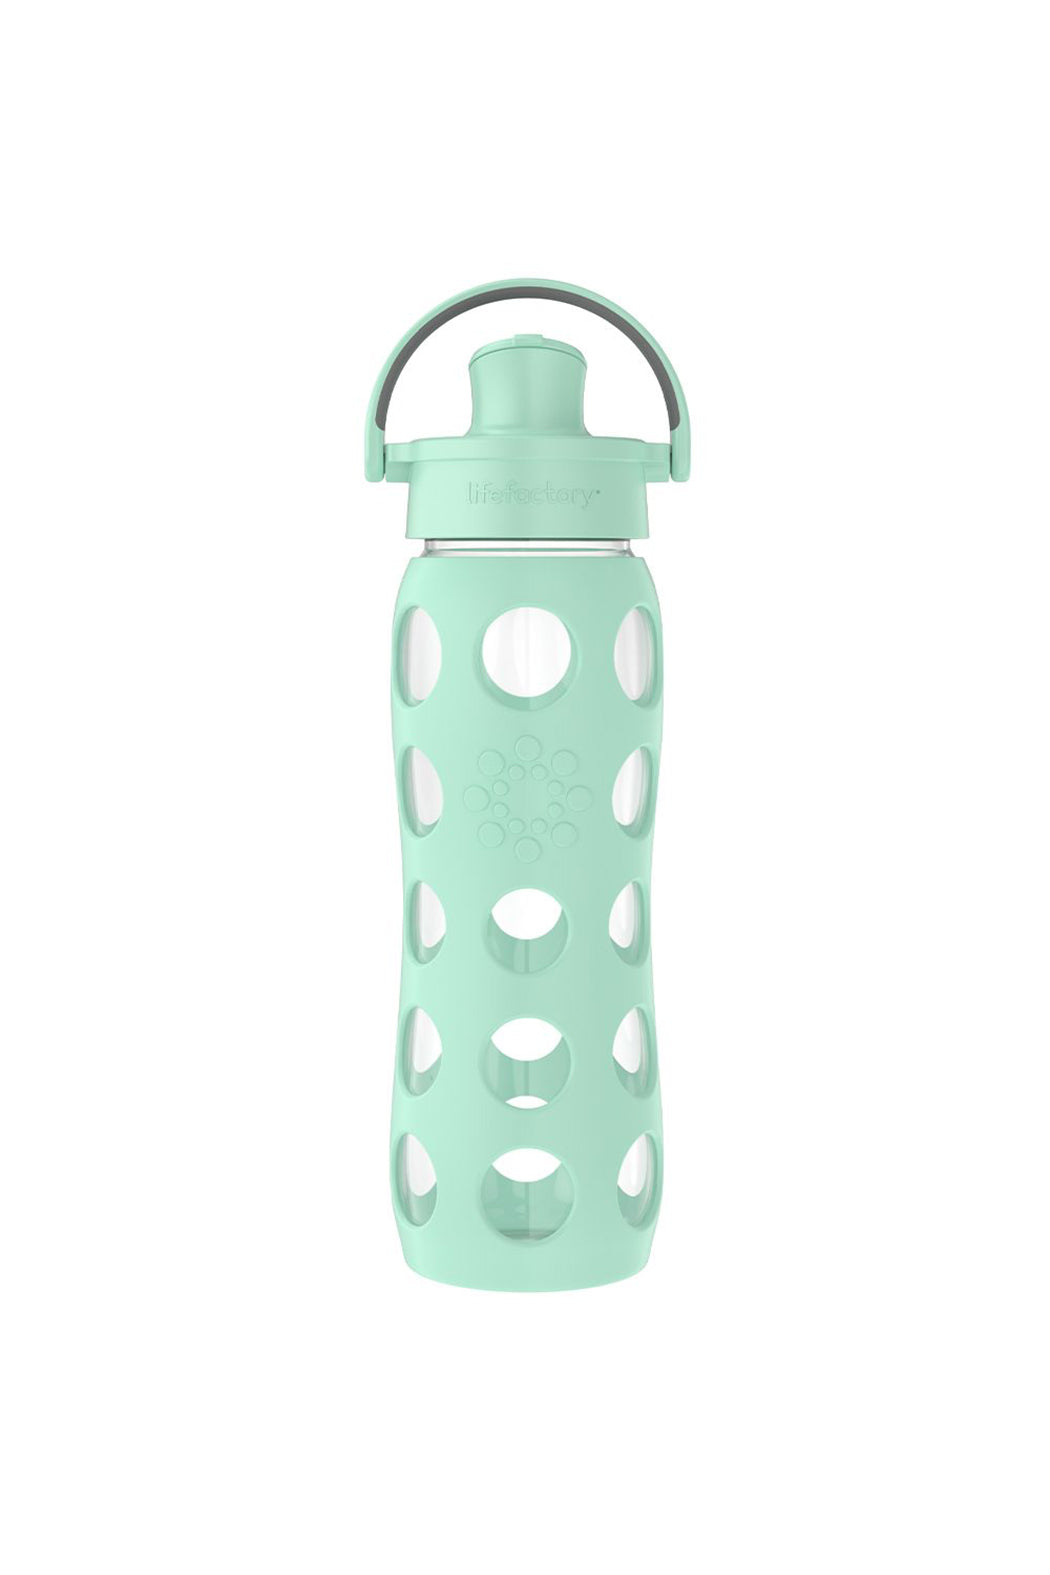 Lifefactory 22oz Glass Water Bottle With Silicone Sleeve & Active Cap: Mint